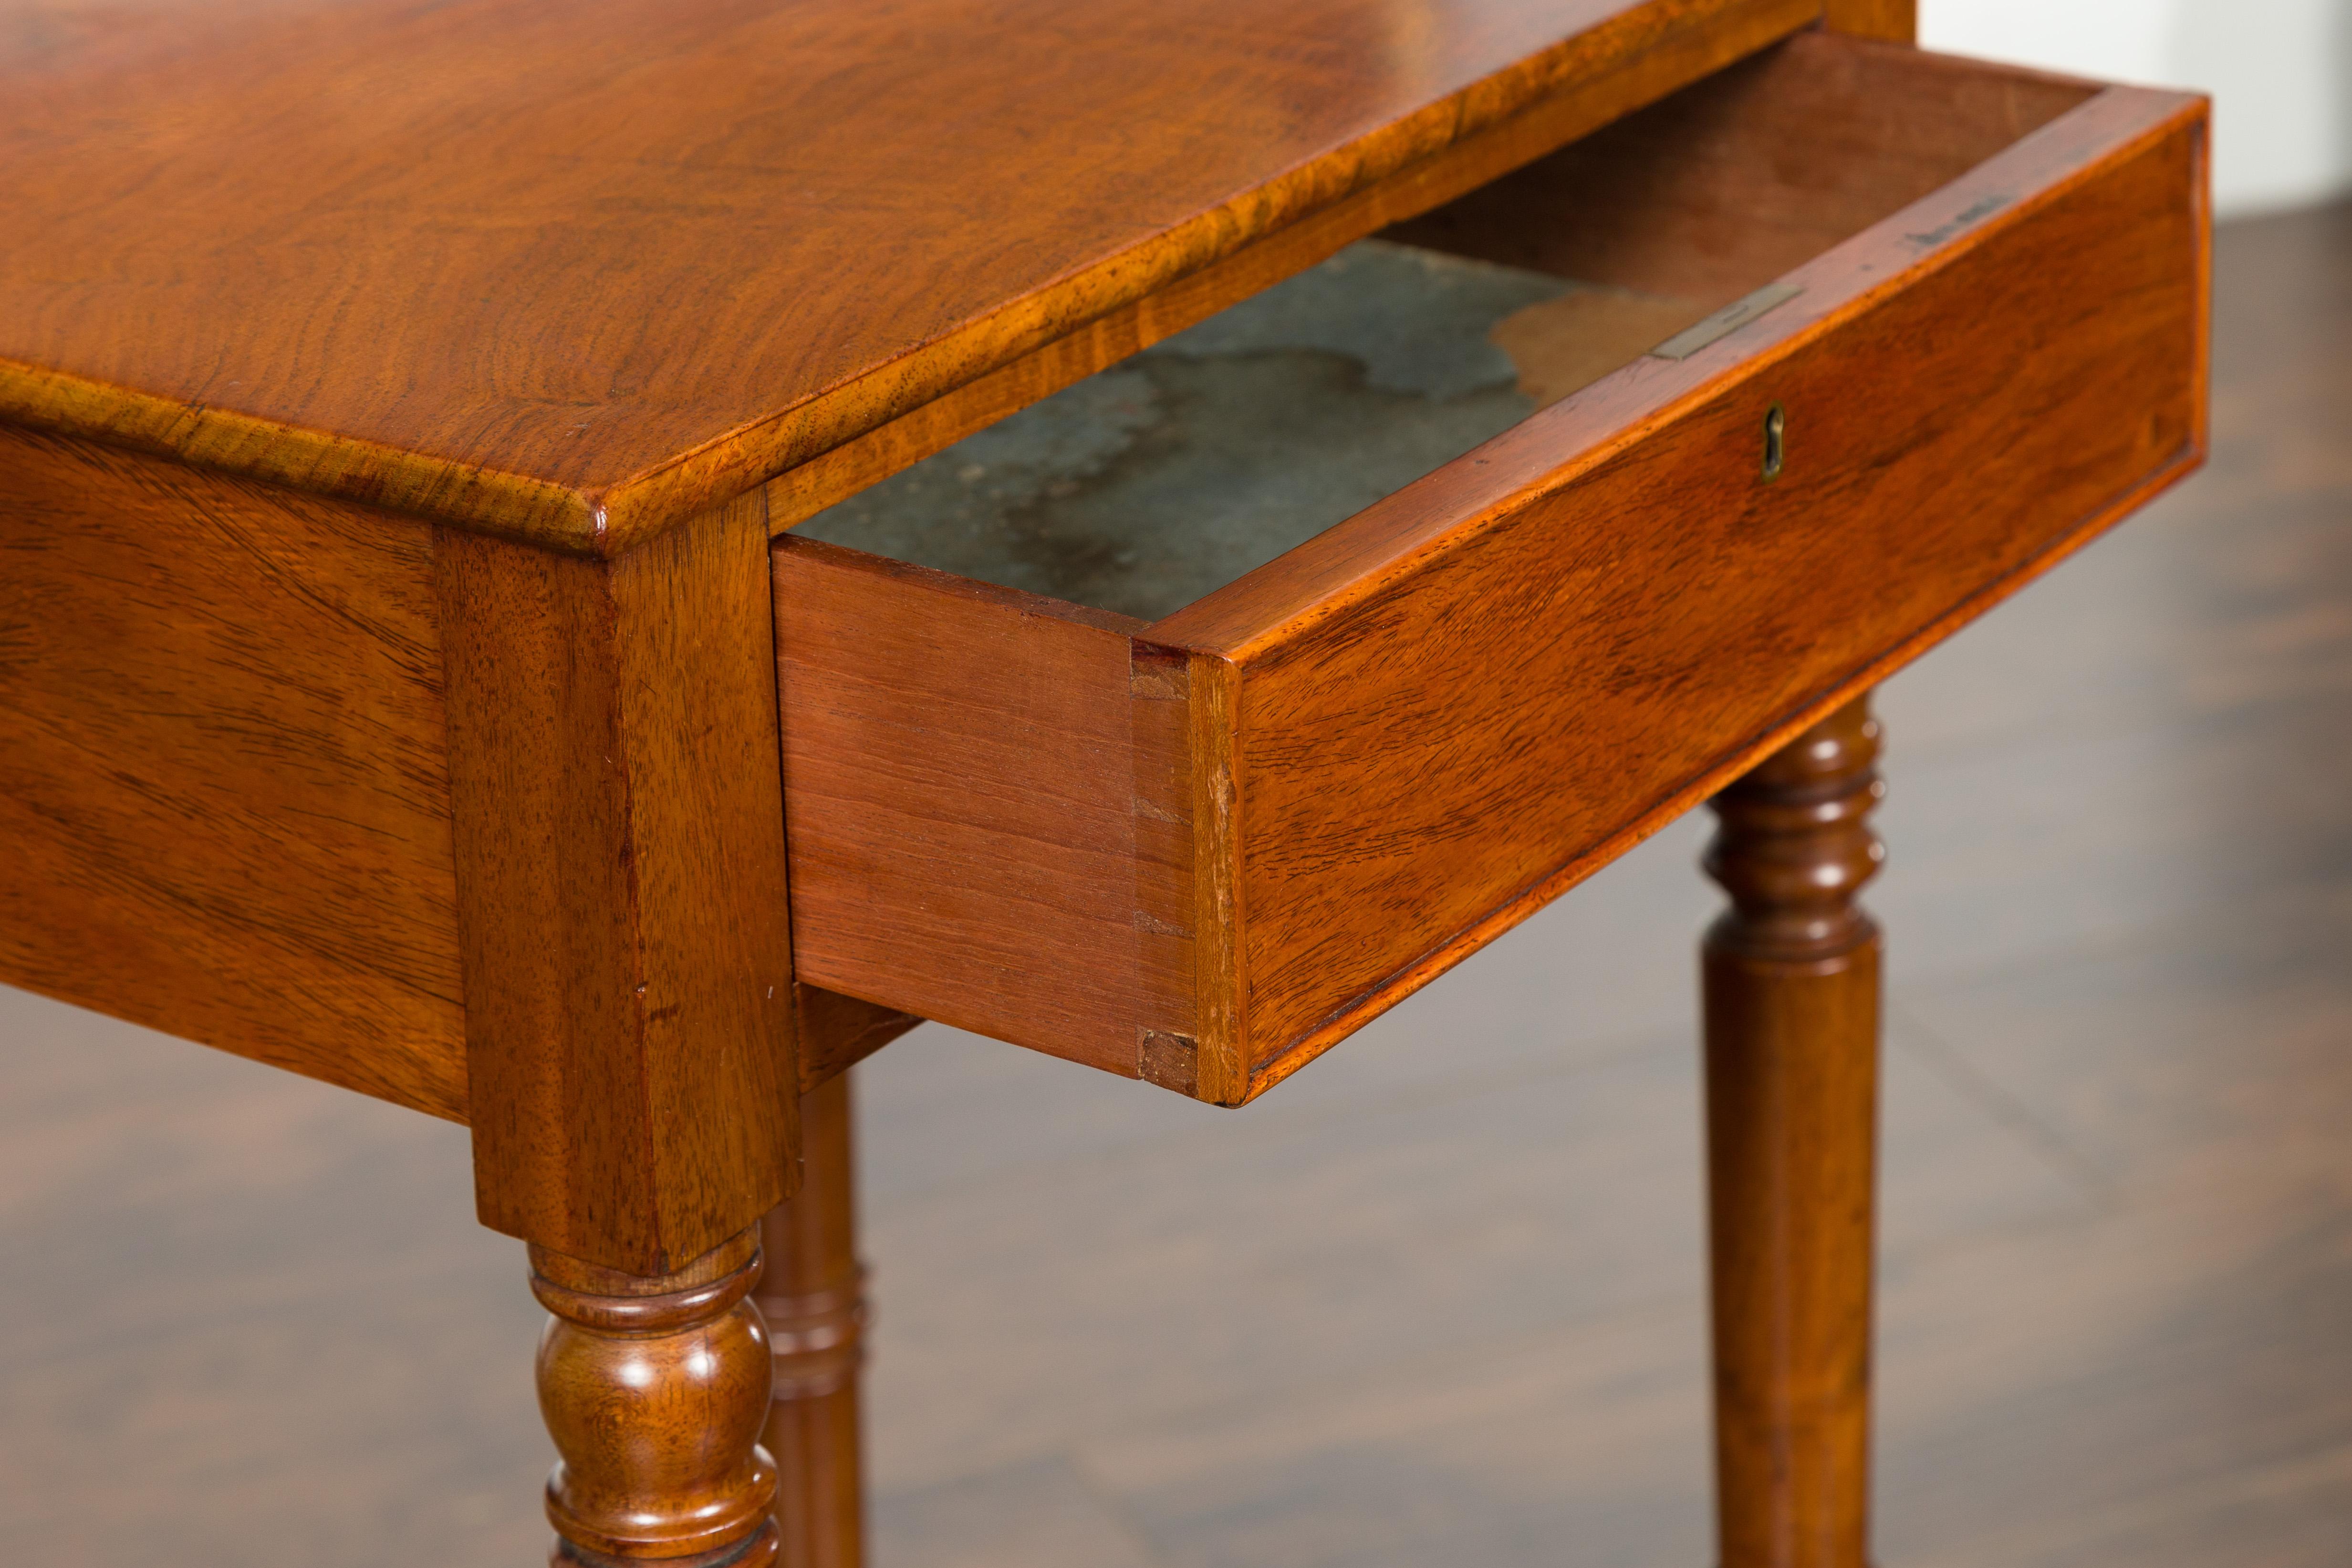 English 1820s Walnut Side Table with Single Drawer, Turned Legs and Casters For Sale 6